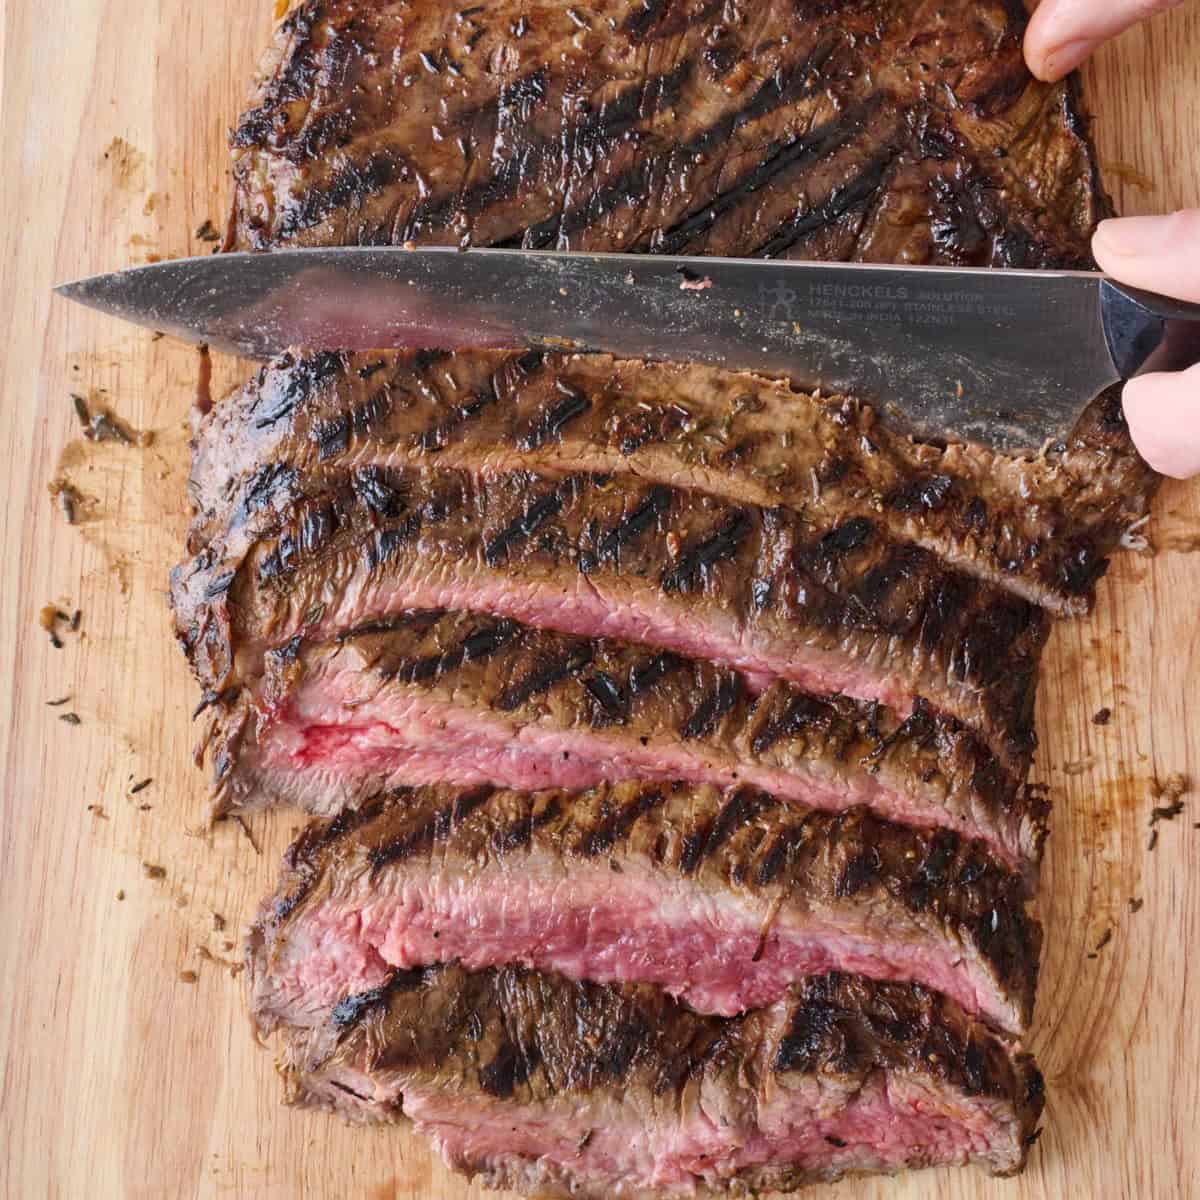 Knife continuing to cut steak into thick strips.